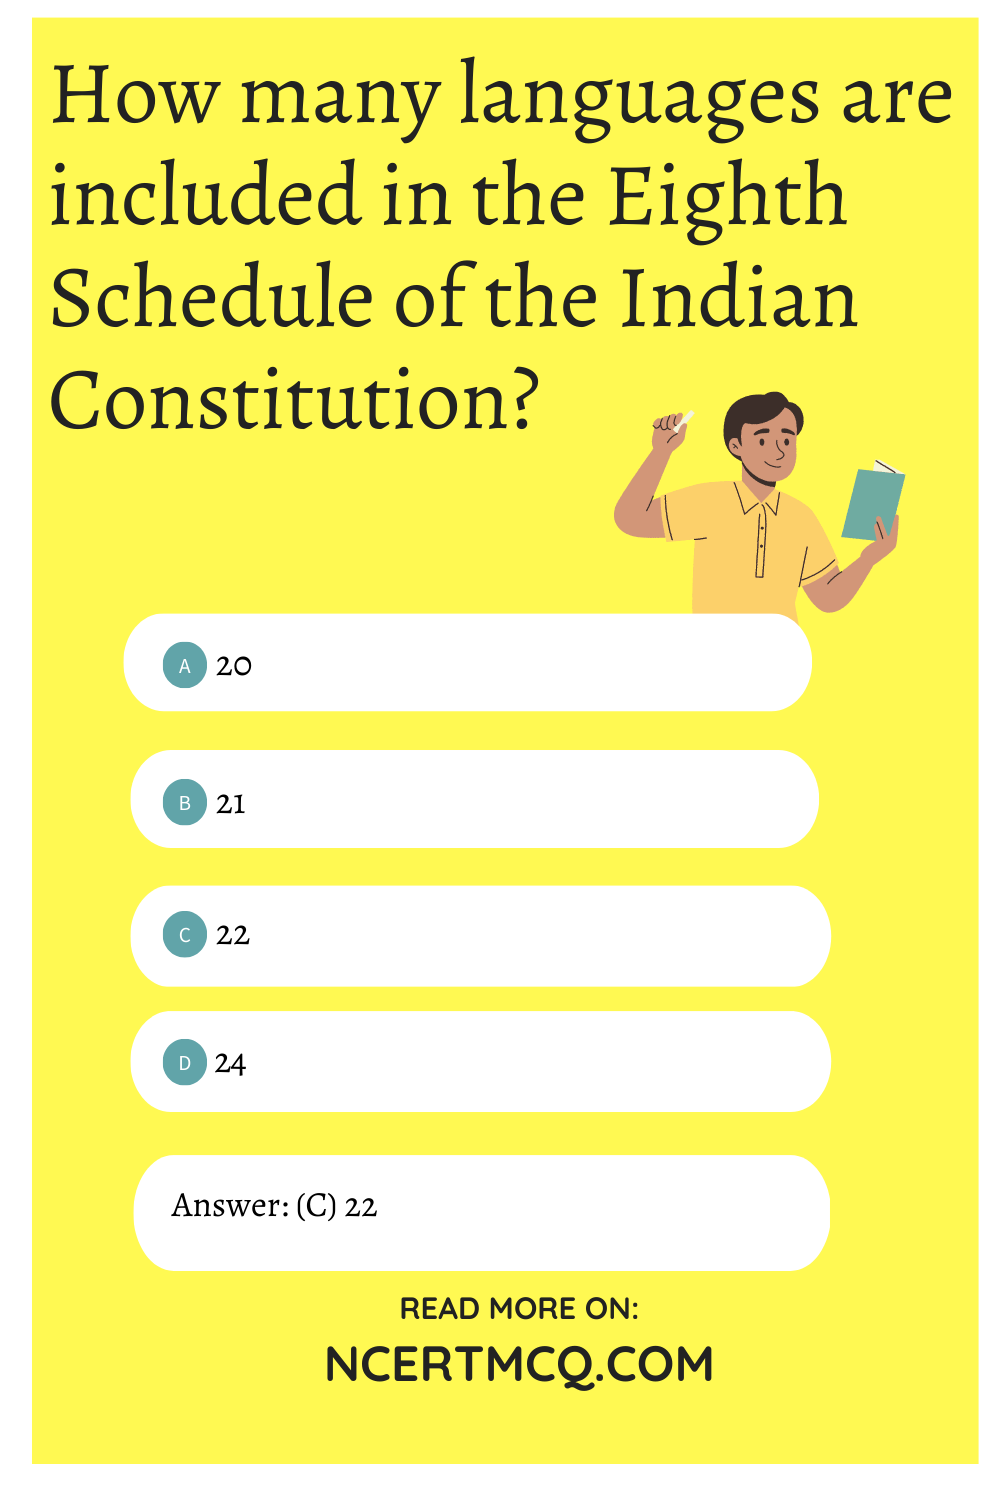 How many languages are included in the Eighth Schedule of the Indian Constitution?